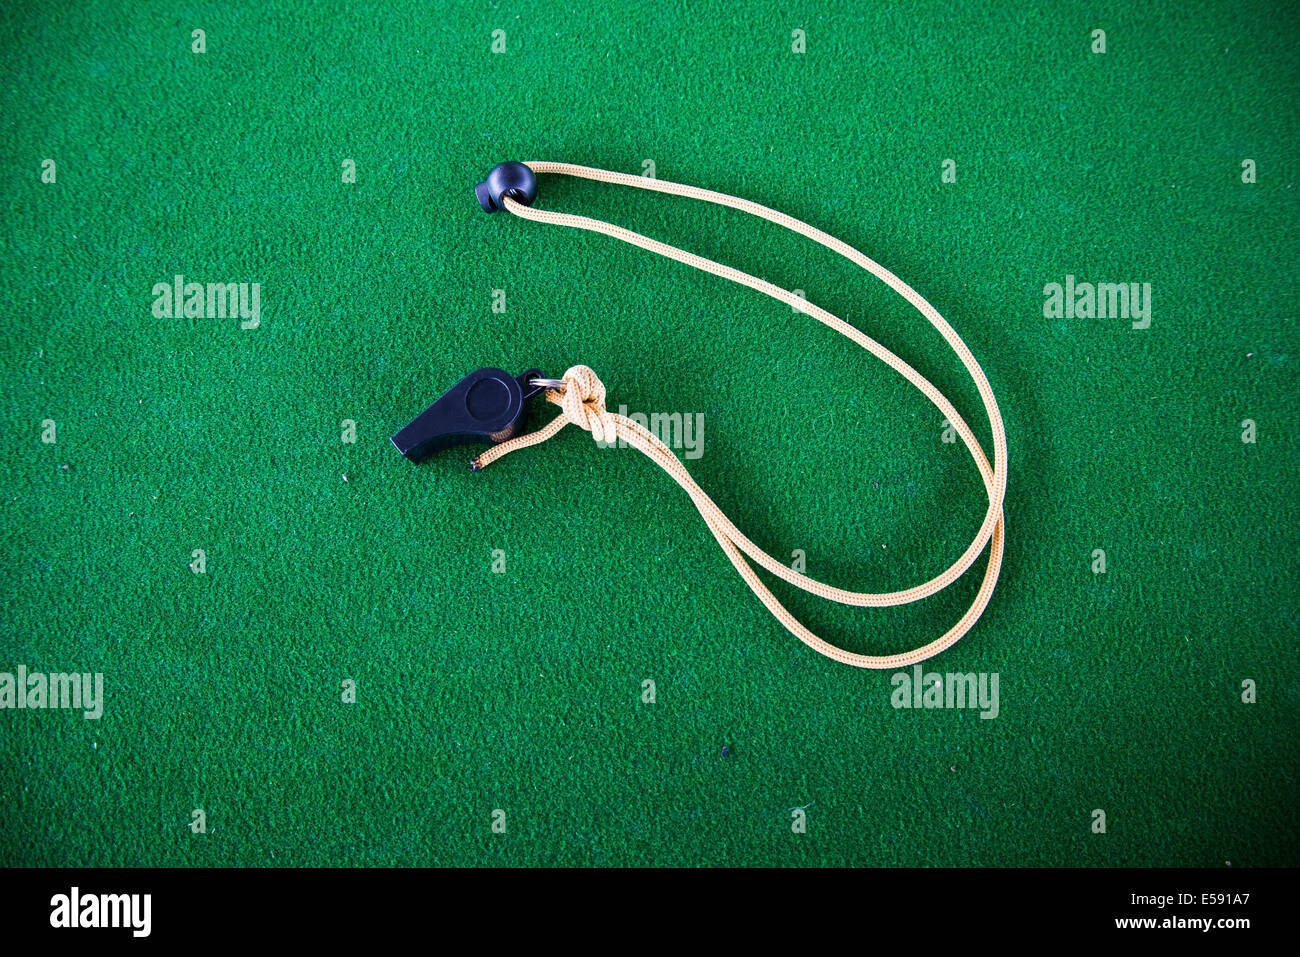 The whistle on the green carpet background. Stock Photo